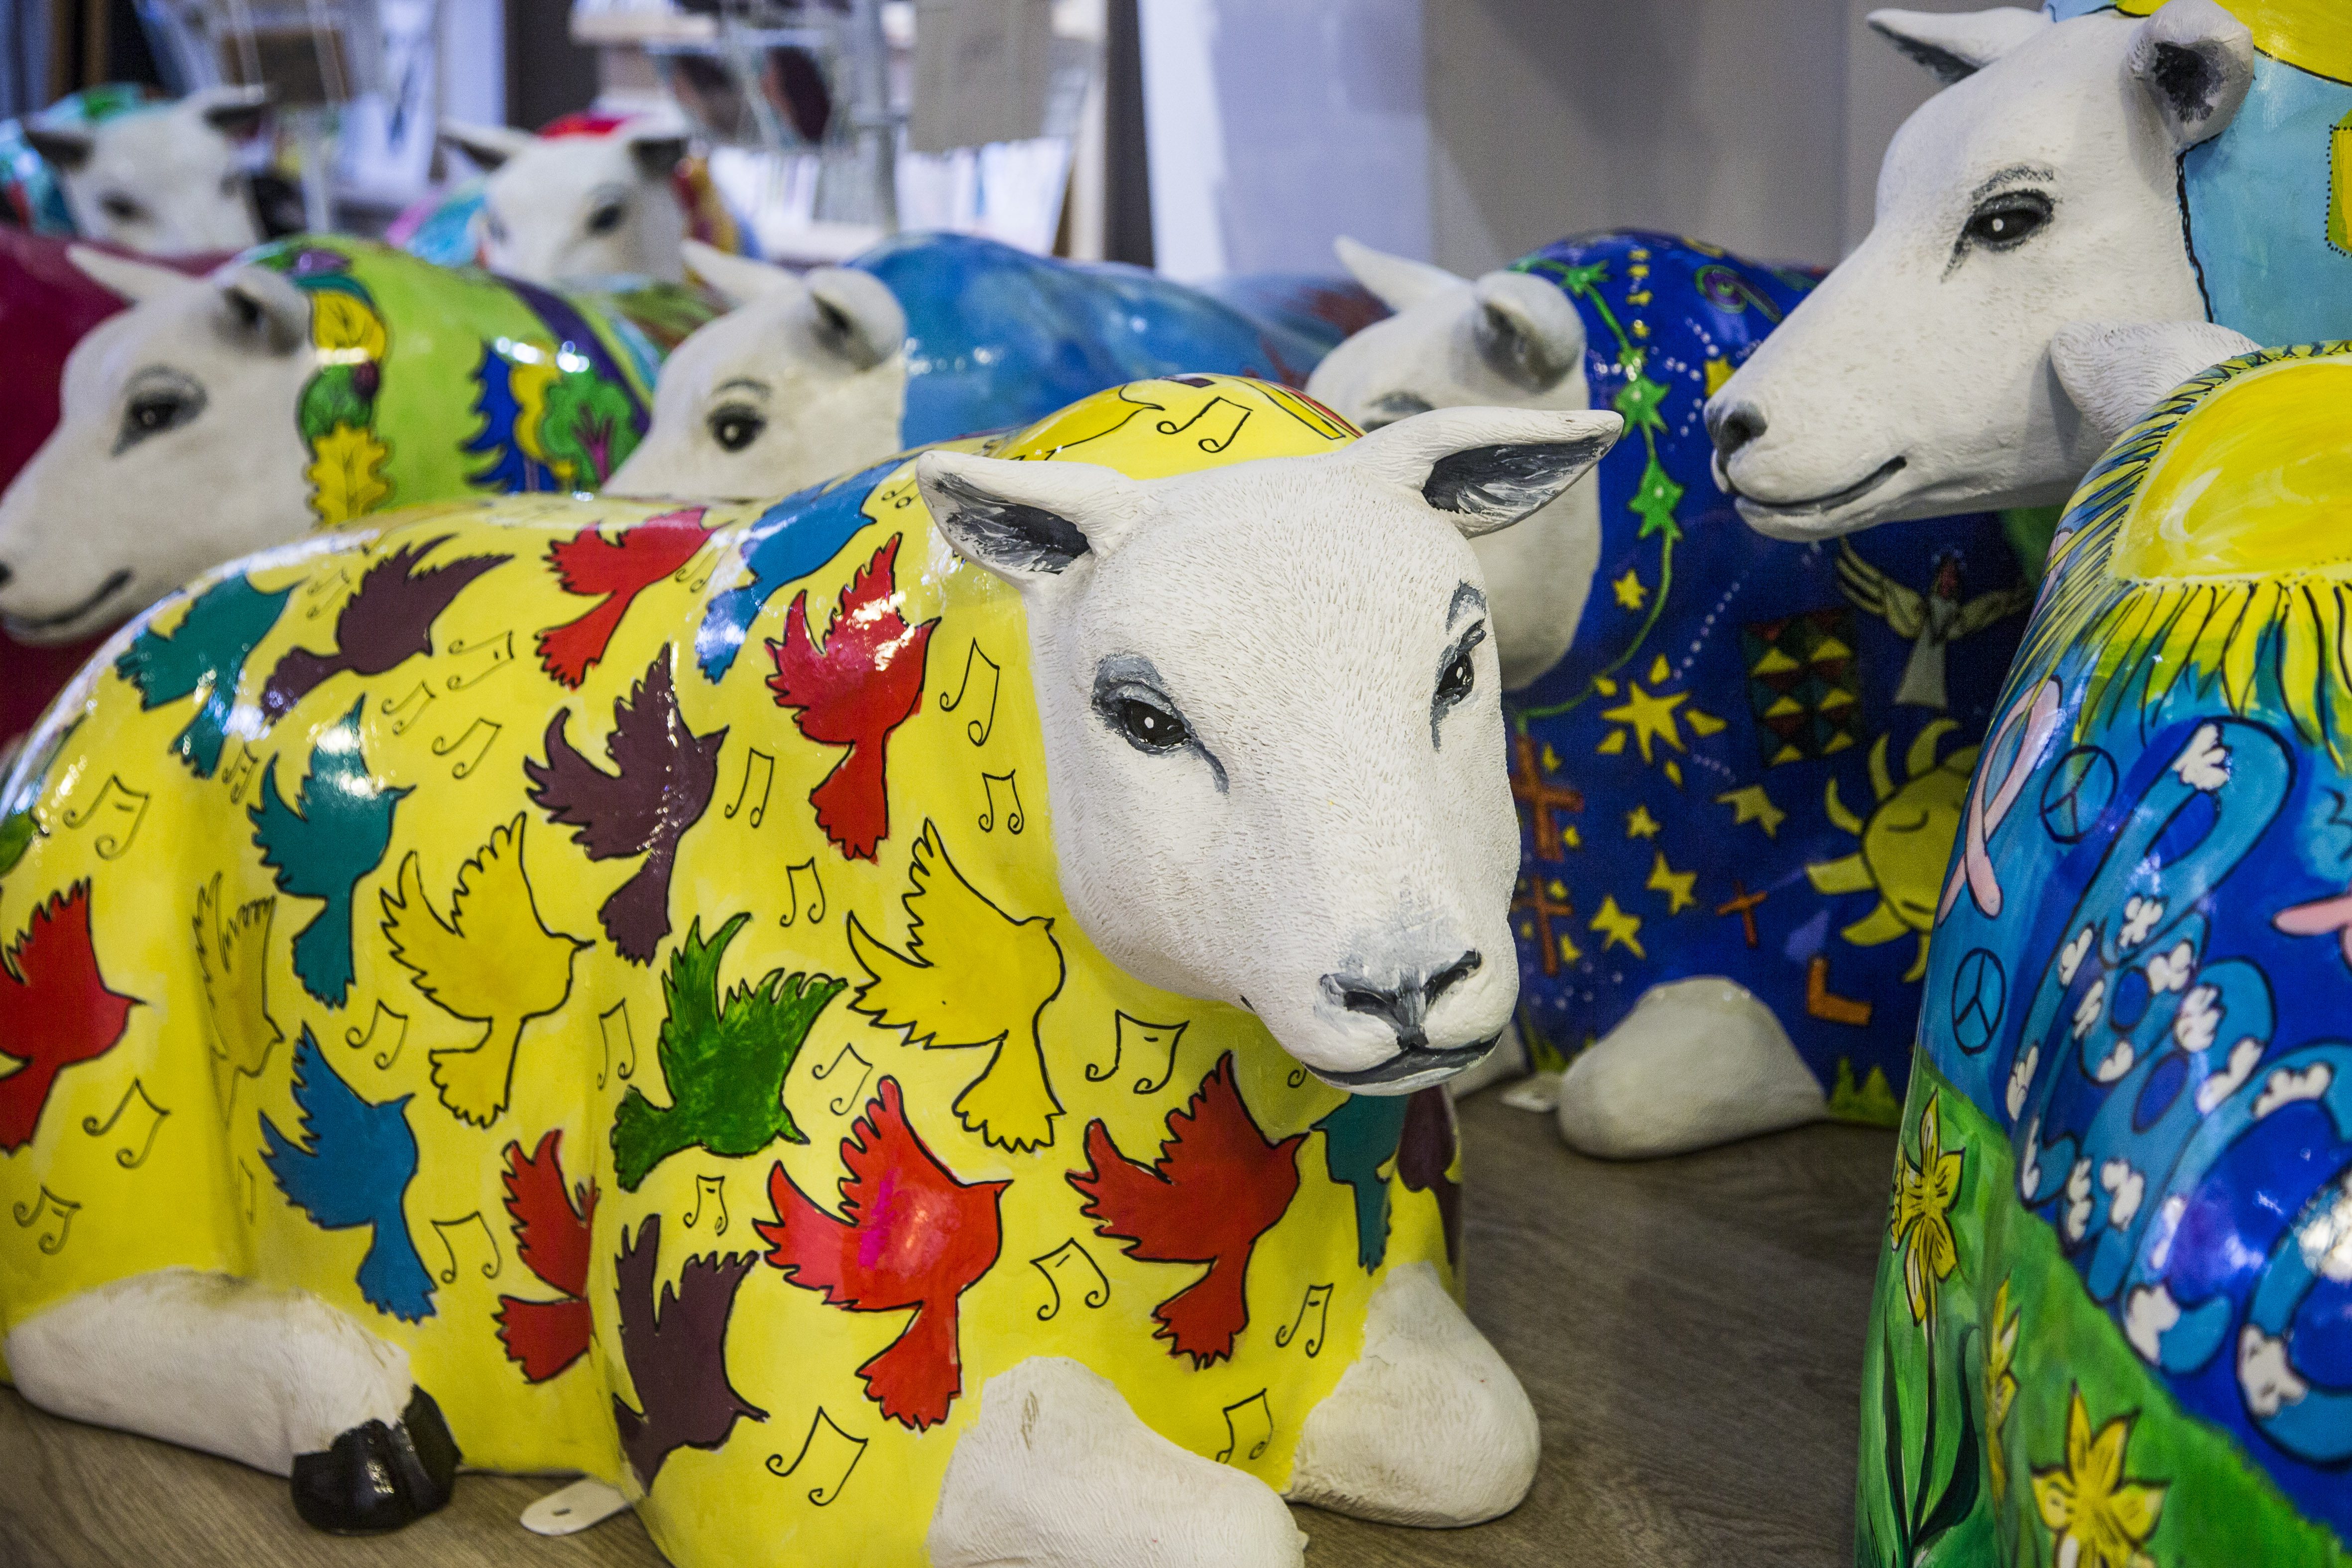 “Ewe Better Look Out!” – New spring arrivals means the Wrexham Sheep Trail flock has grown